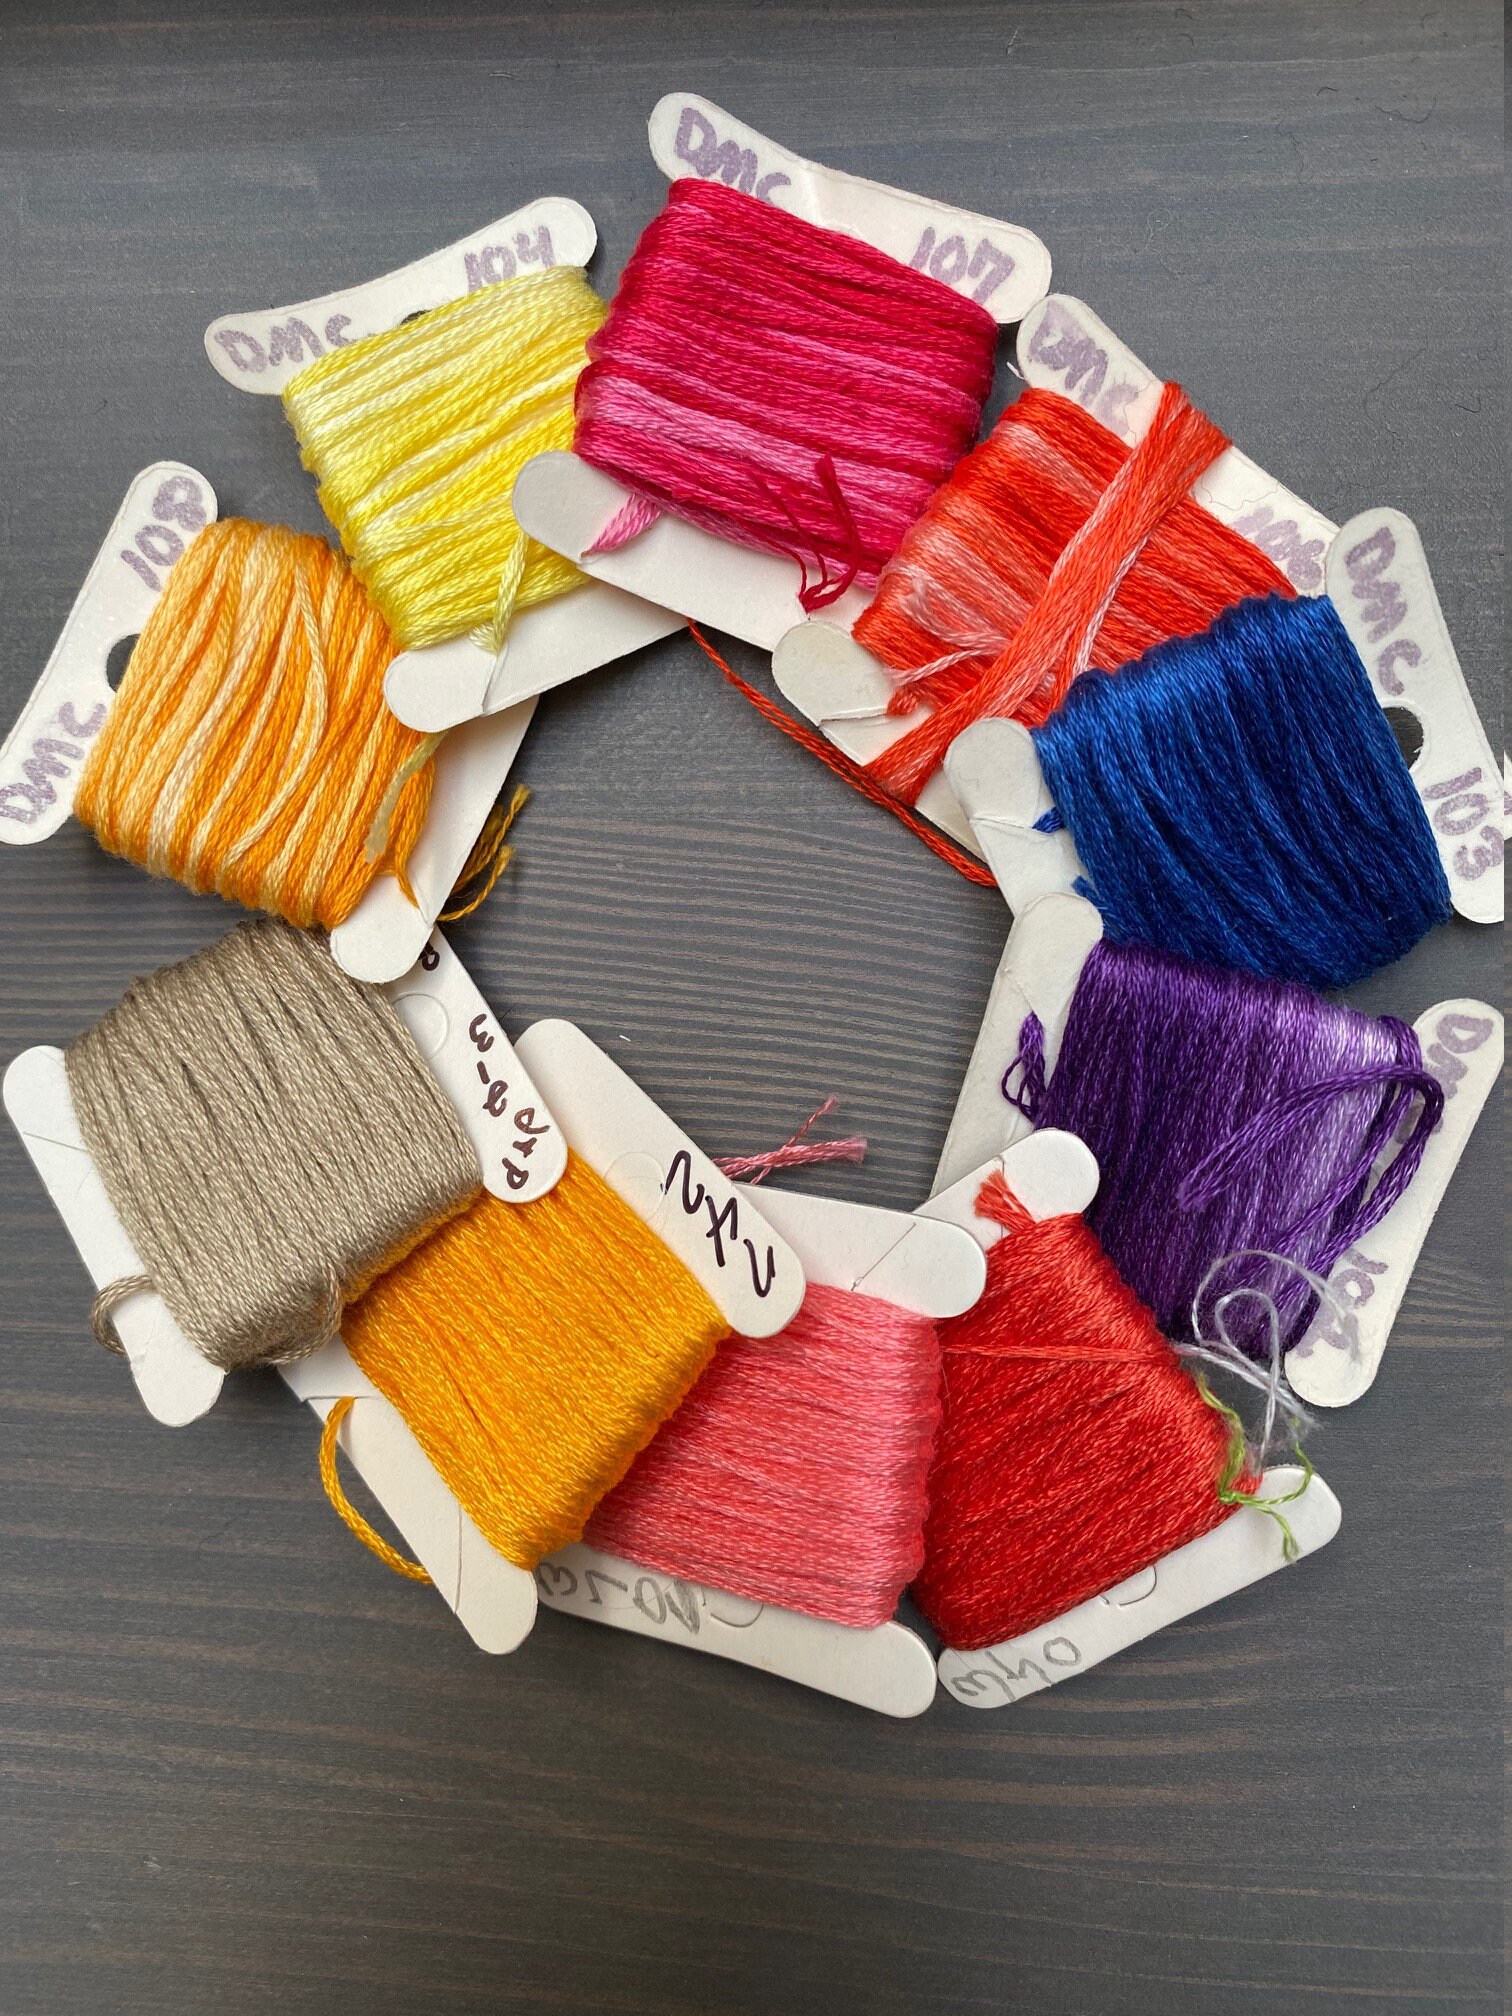 Embroidery Thread On Paper Bobbins